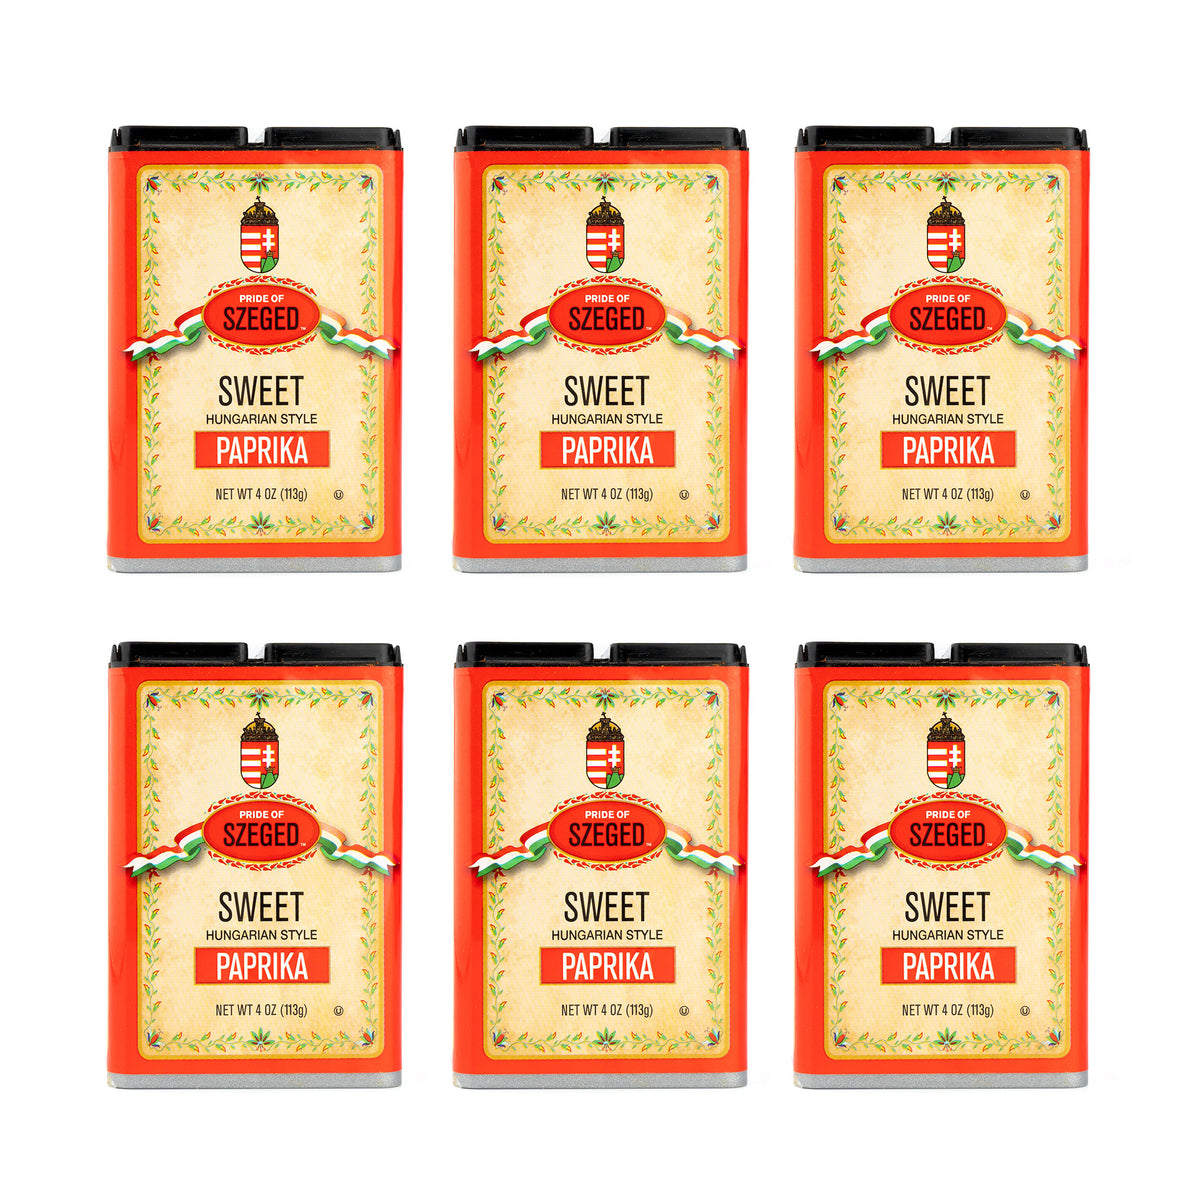 iSpice | Pride of Szeged Sweet Paprika Powder Hungarian Style | 4 oz | Gourmet Spice | 6-pack